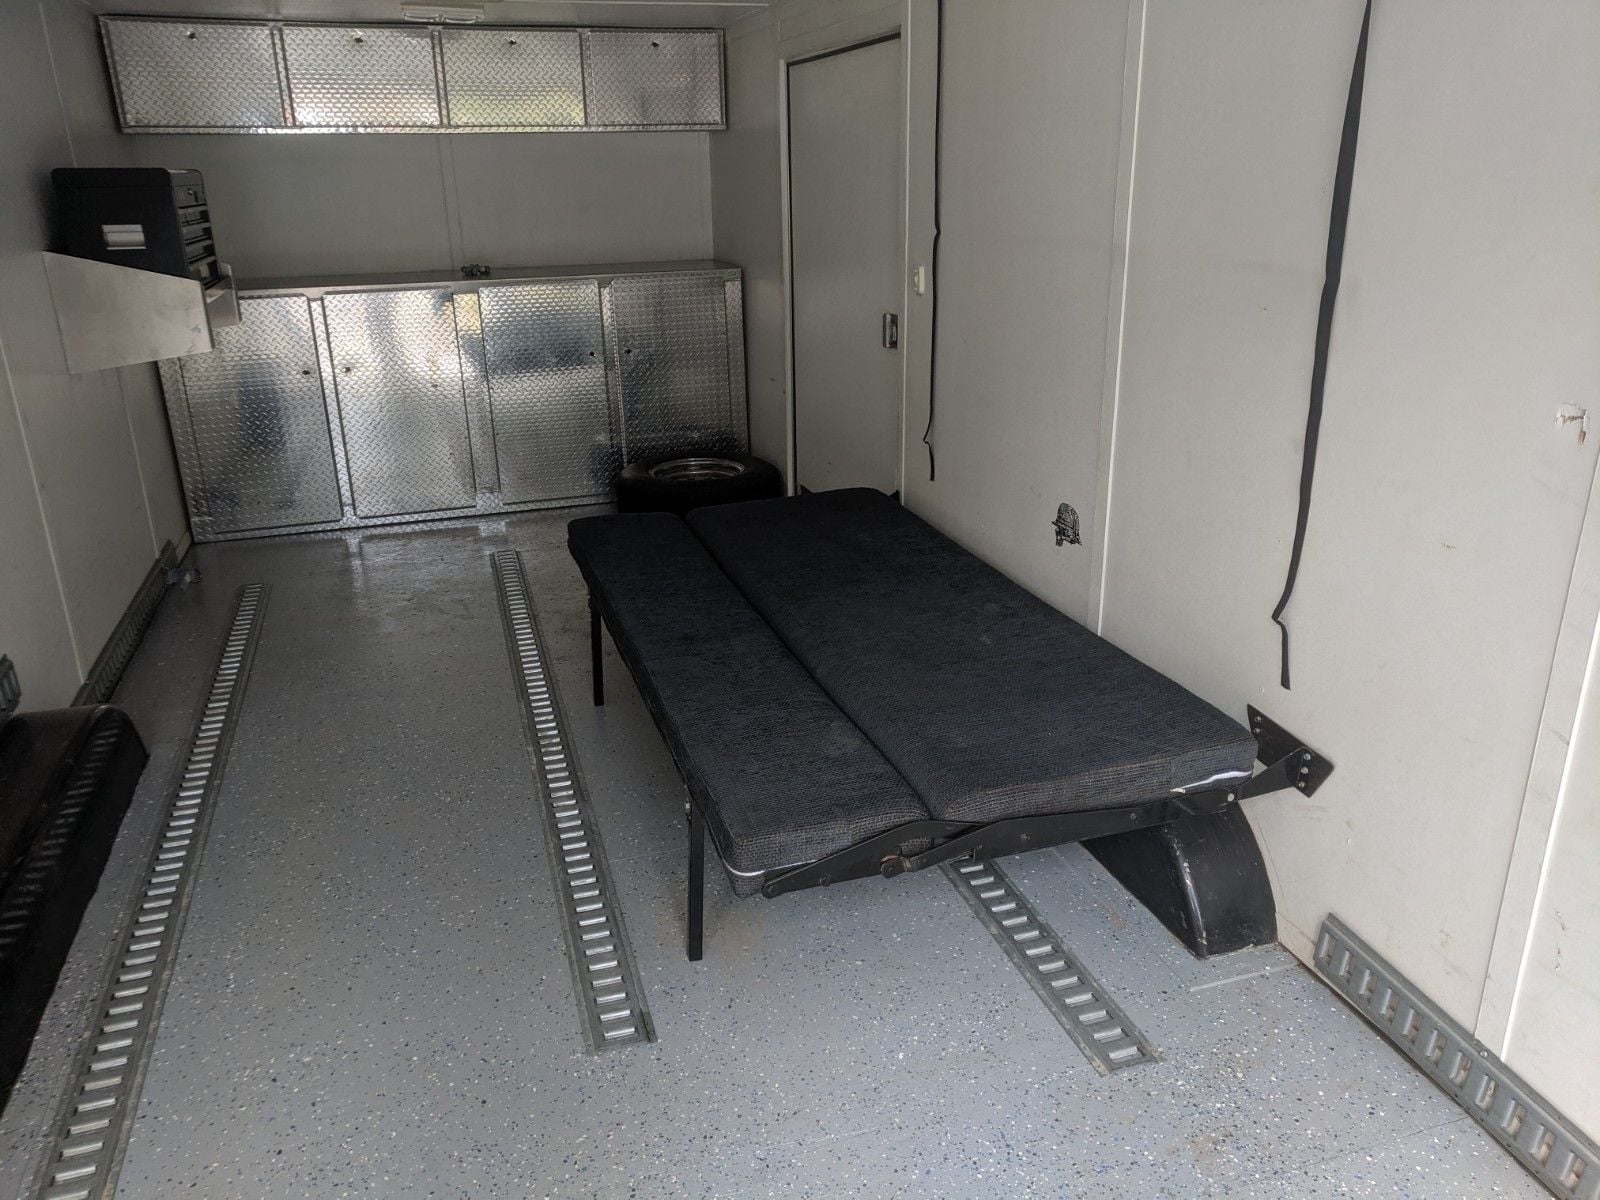 Miscellaneous - Carsen Racer 8.5 x 20 ft Enclosed Trailer - Used - Danville, CA 94506, United States